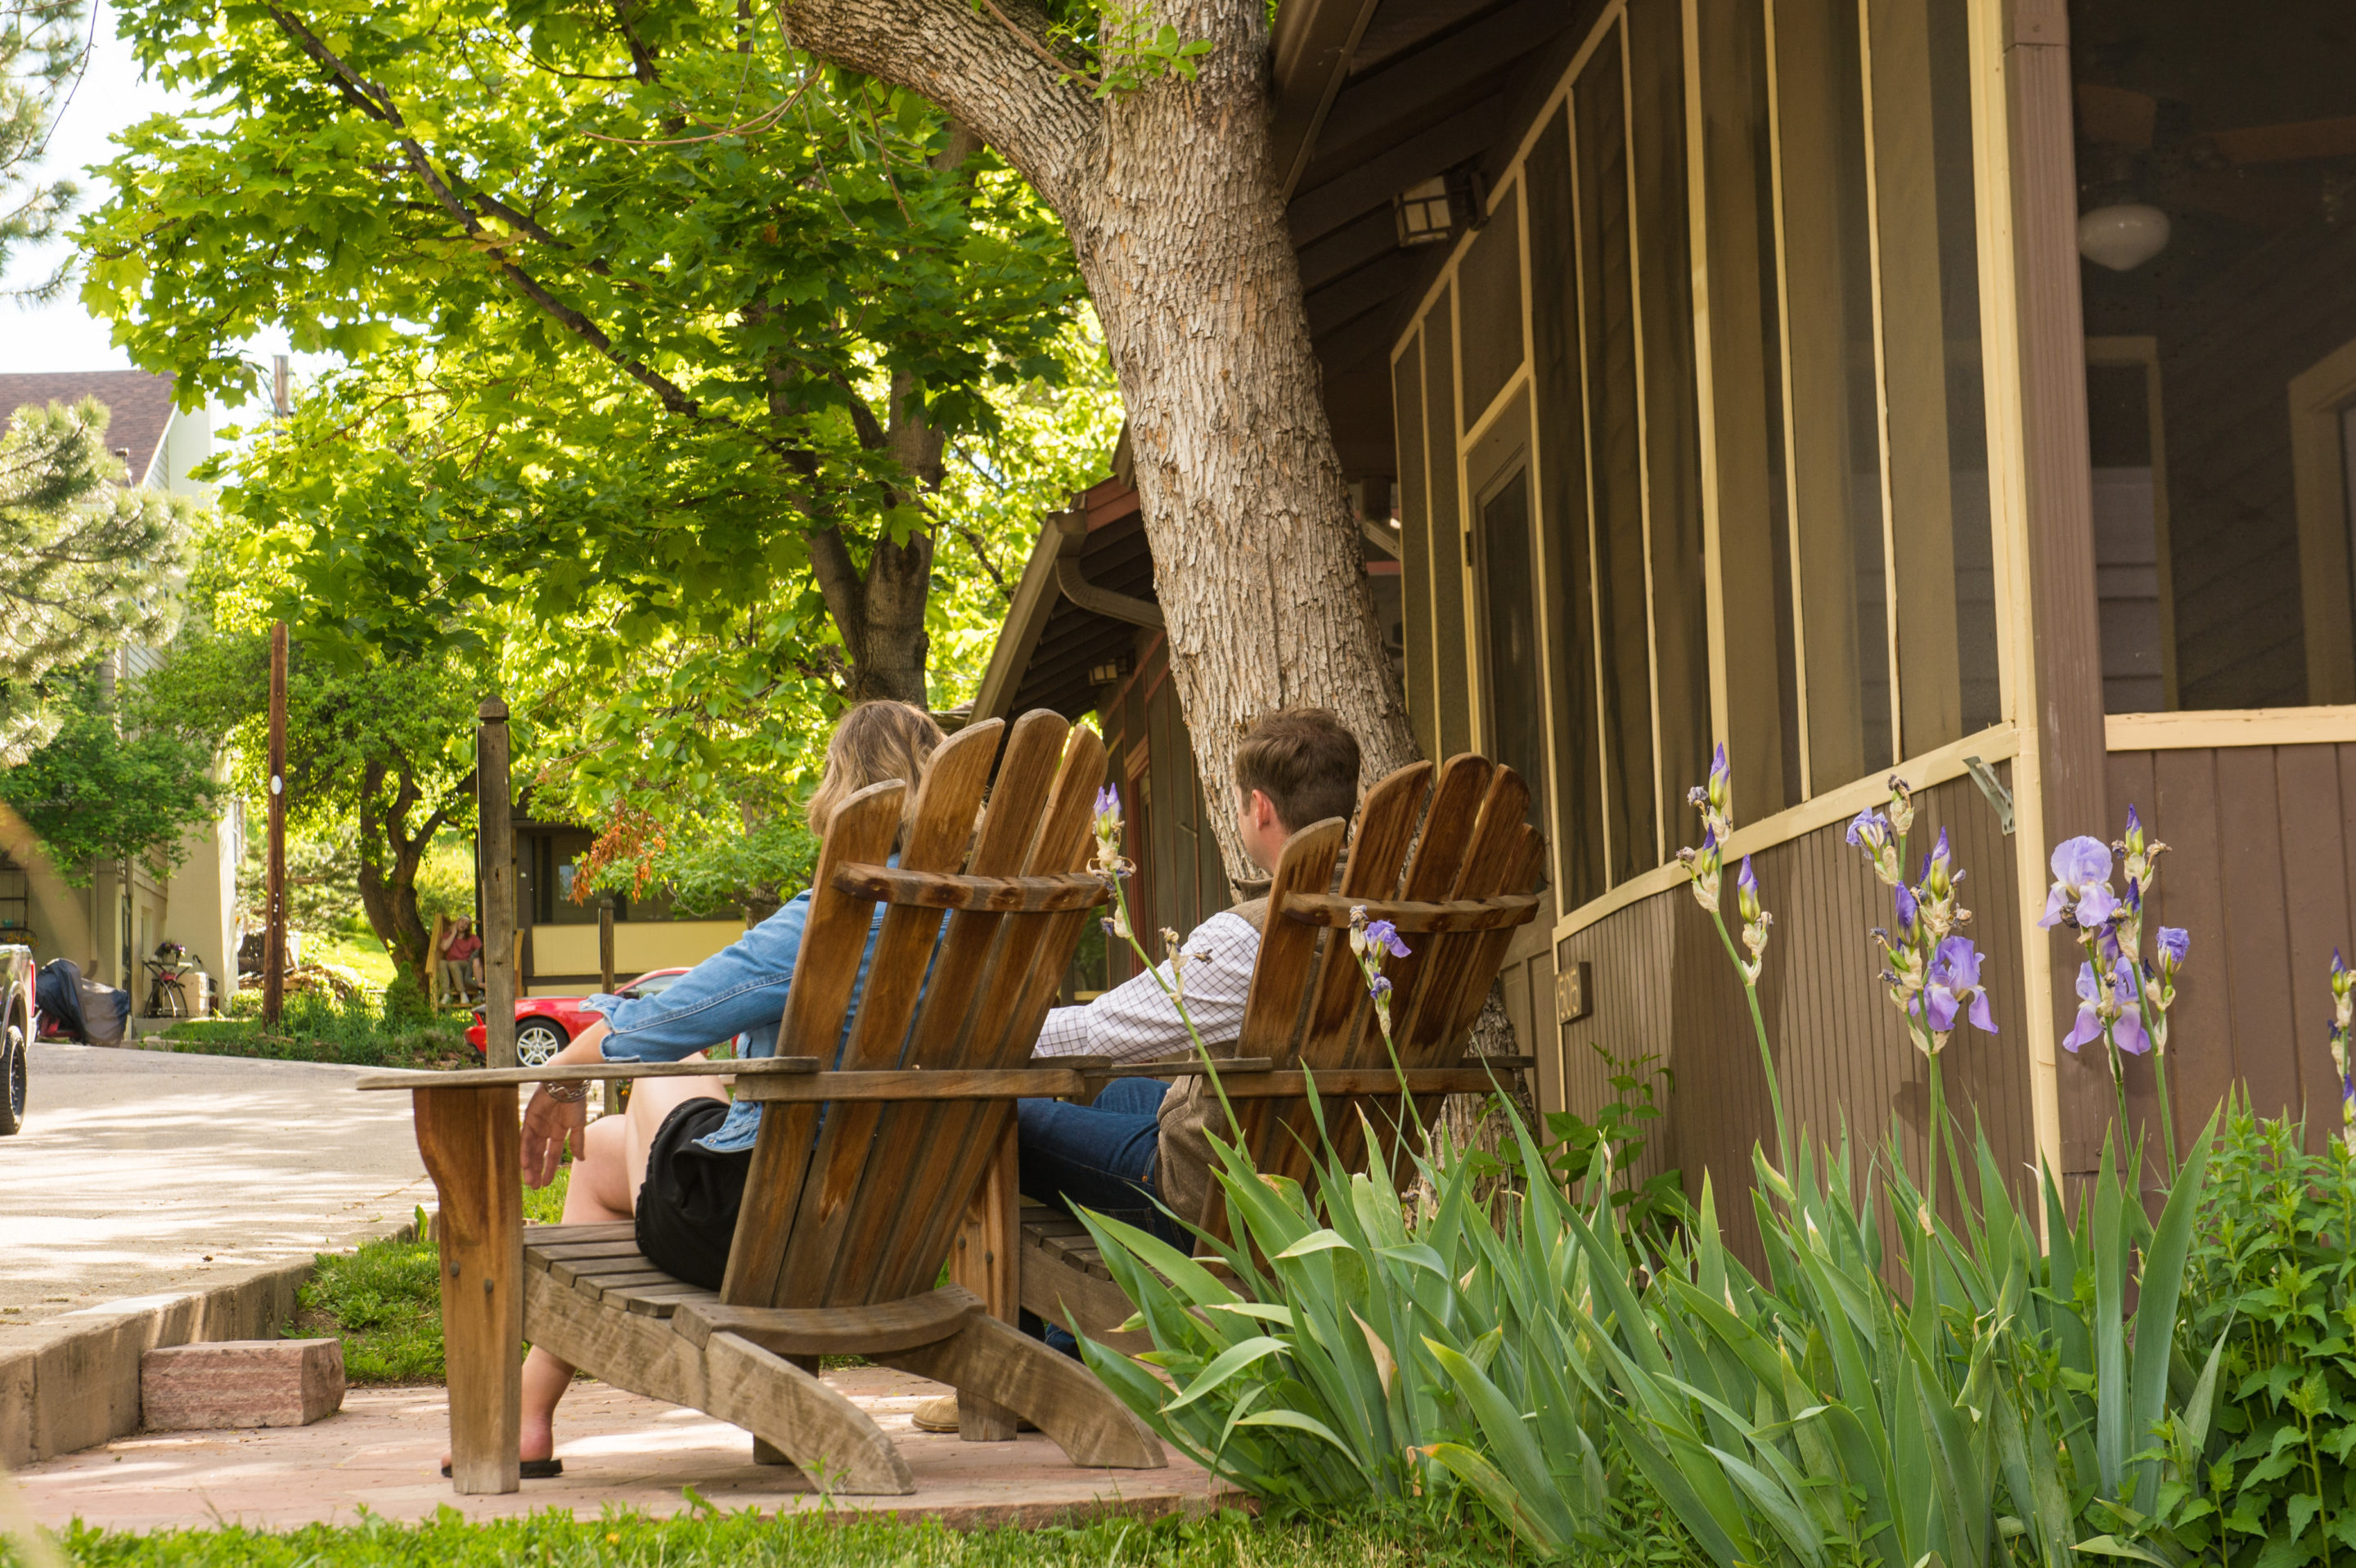 Couple relaxing in chairs outside Chautauqua cottage